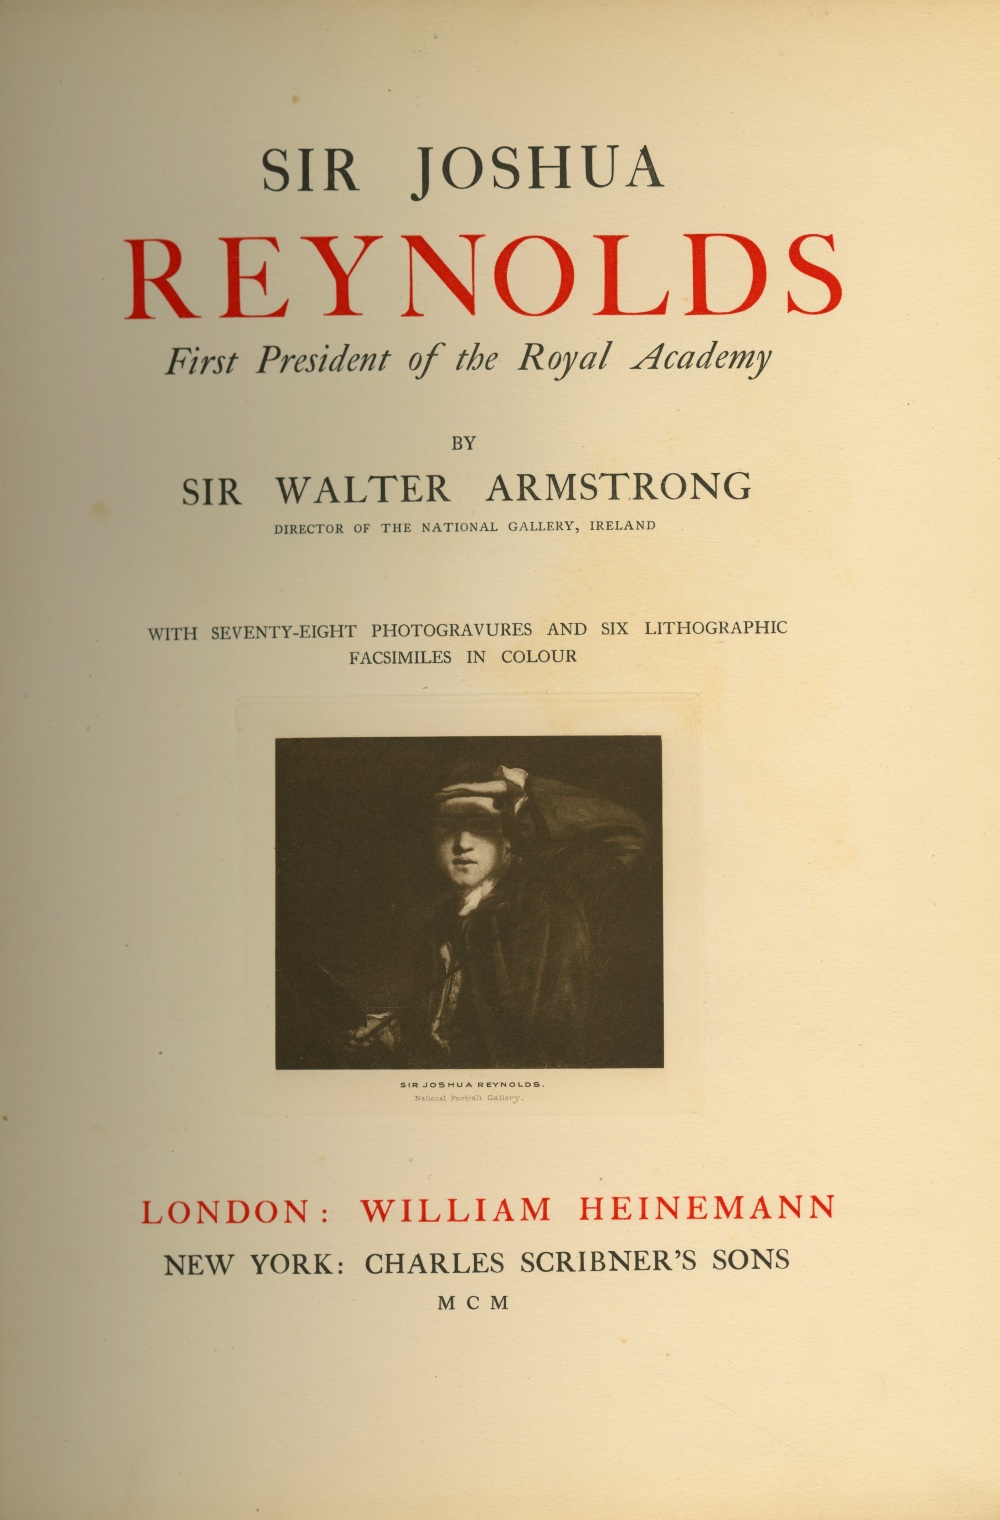 Armstrong (Sir Walter) [Director National Gallery,